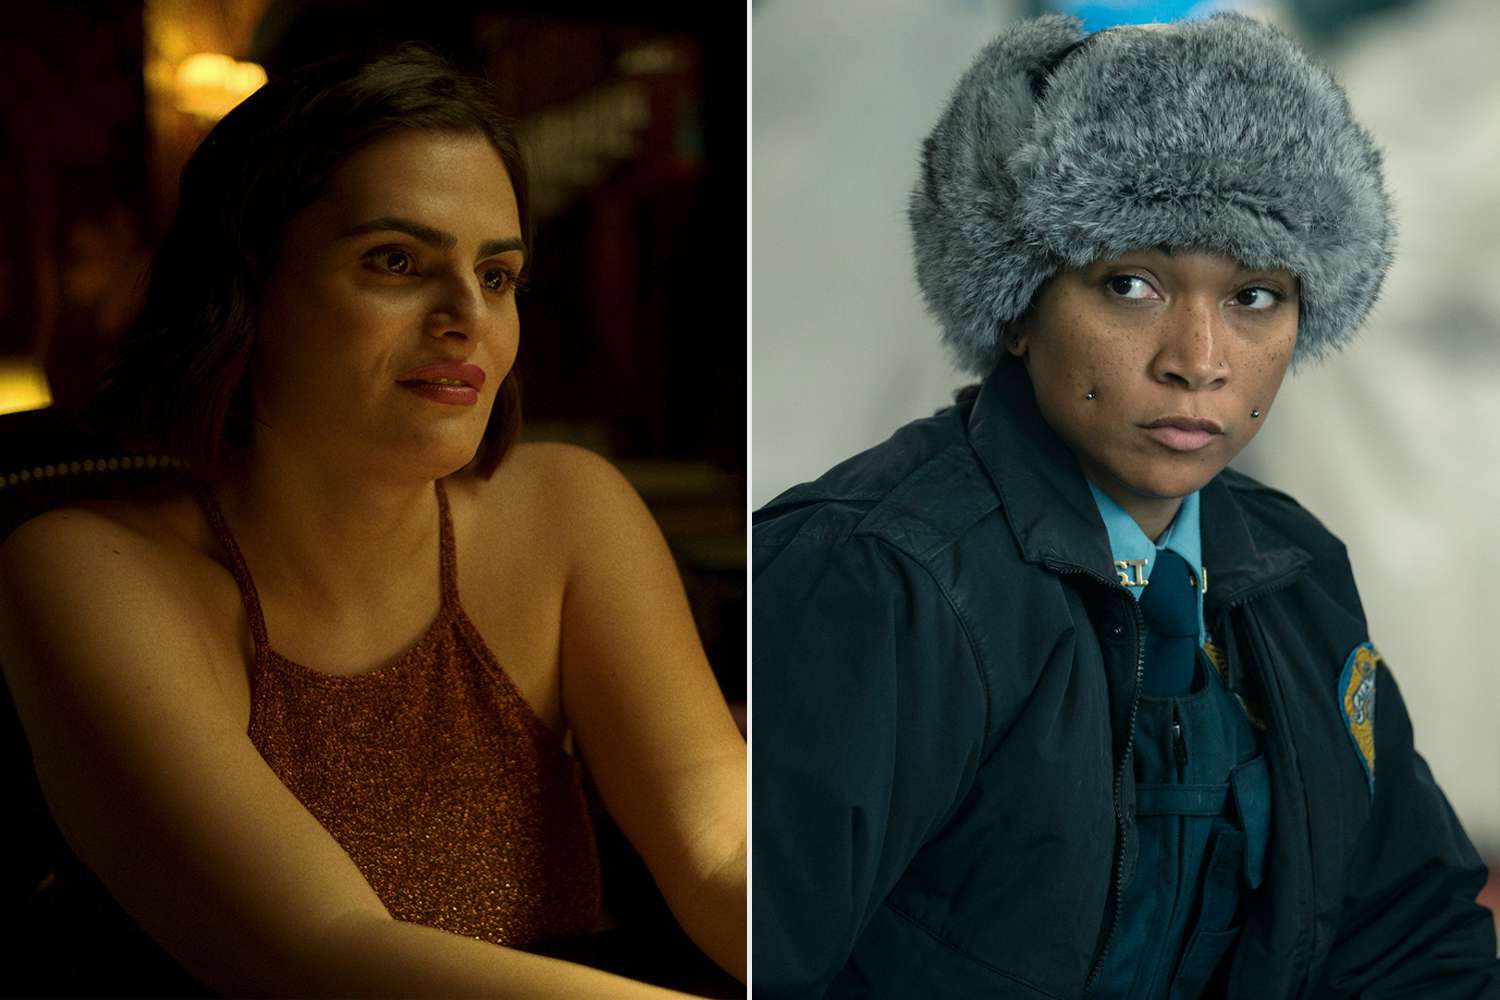 'True Detective' star Kali Reis and Nava Mau of 'Baby Reindeer' on historic Emmy nods: 'It's about time'